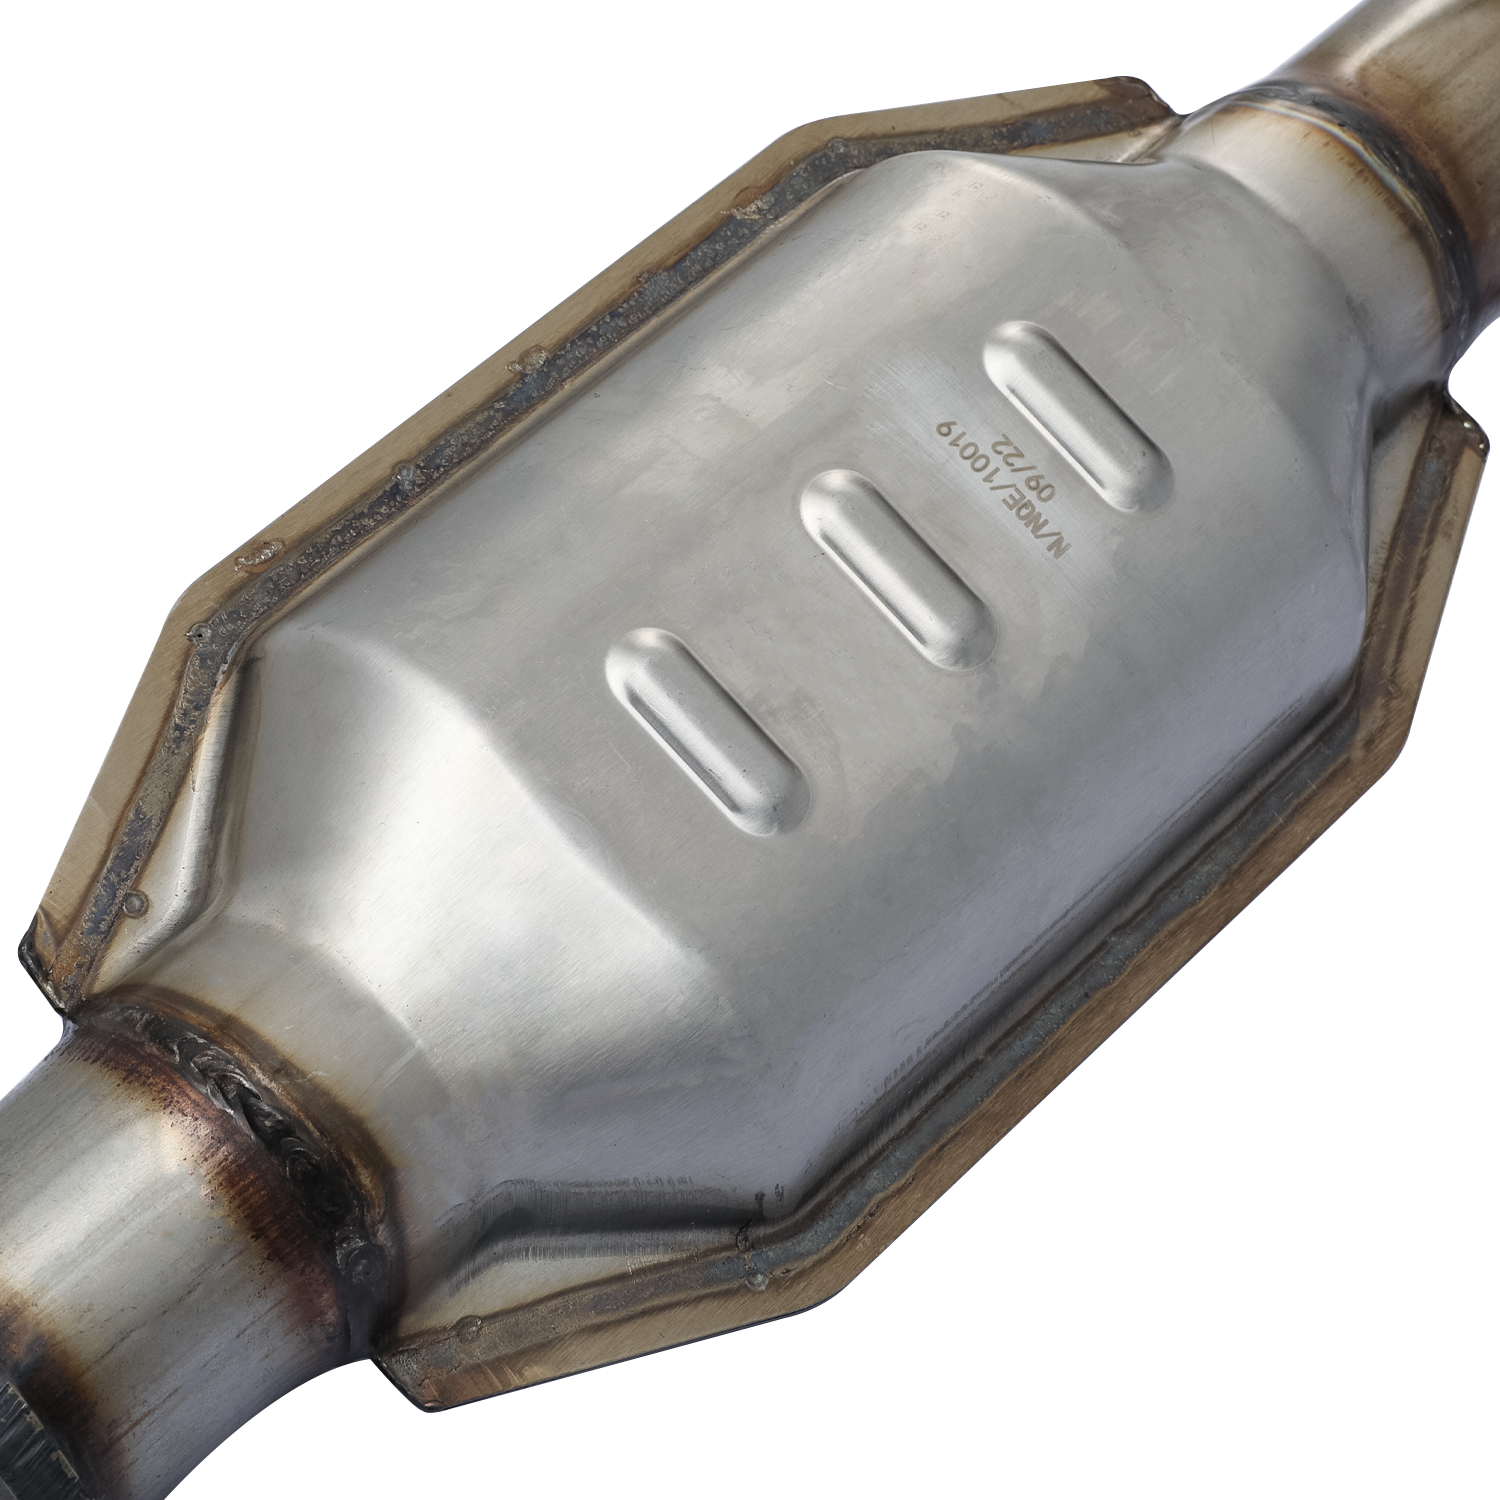 OE Replacement Catalytic Converter<br>96-99 Chevy Blazer, GMC Jimmy 4.3L